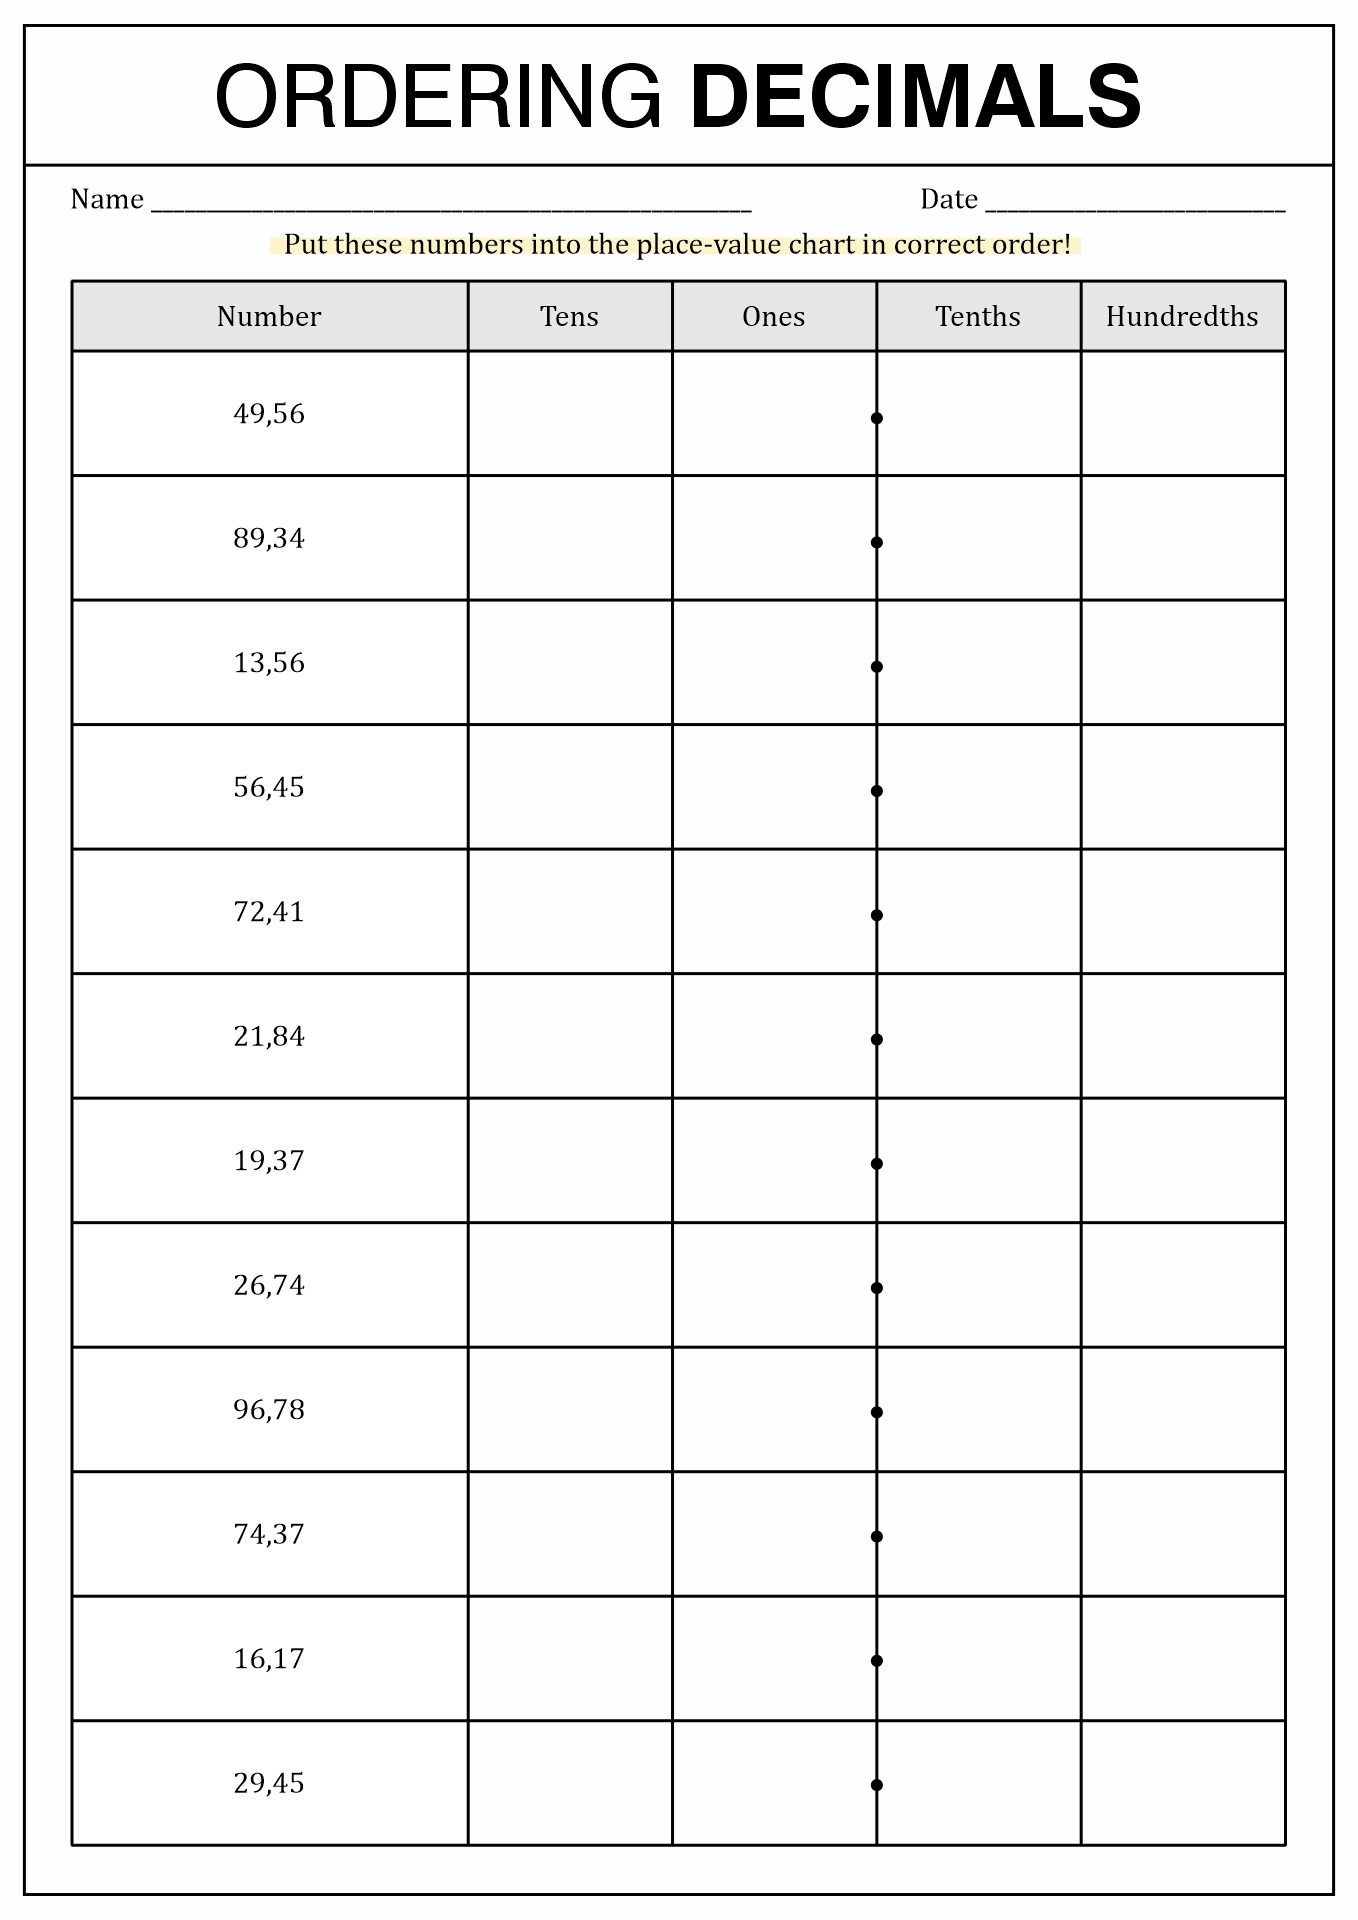 13-best-images-of-blank-place-value-worksheets-place-value-chart-with